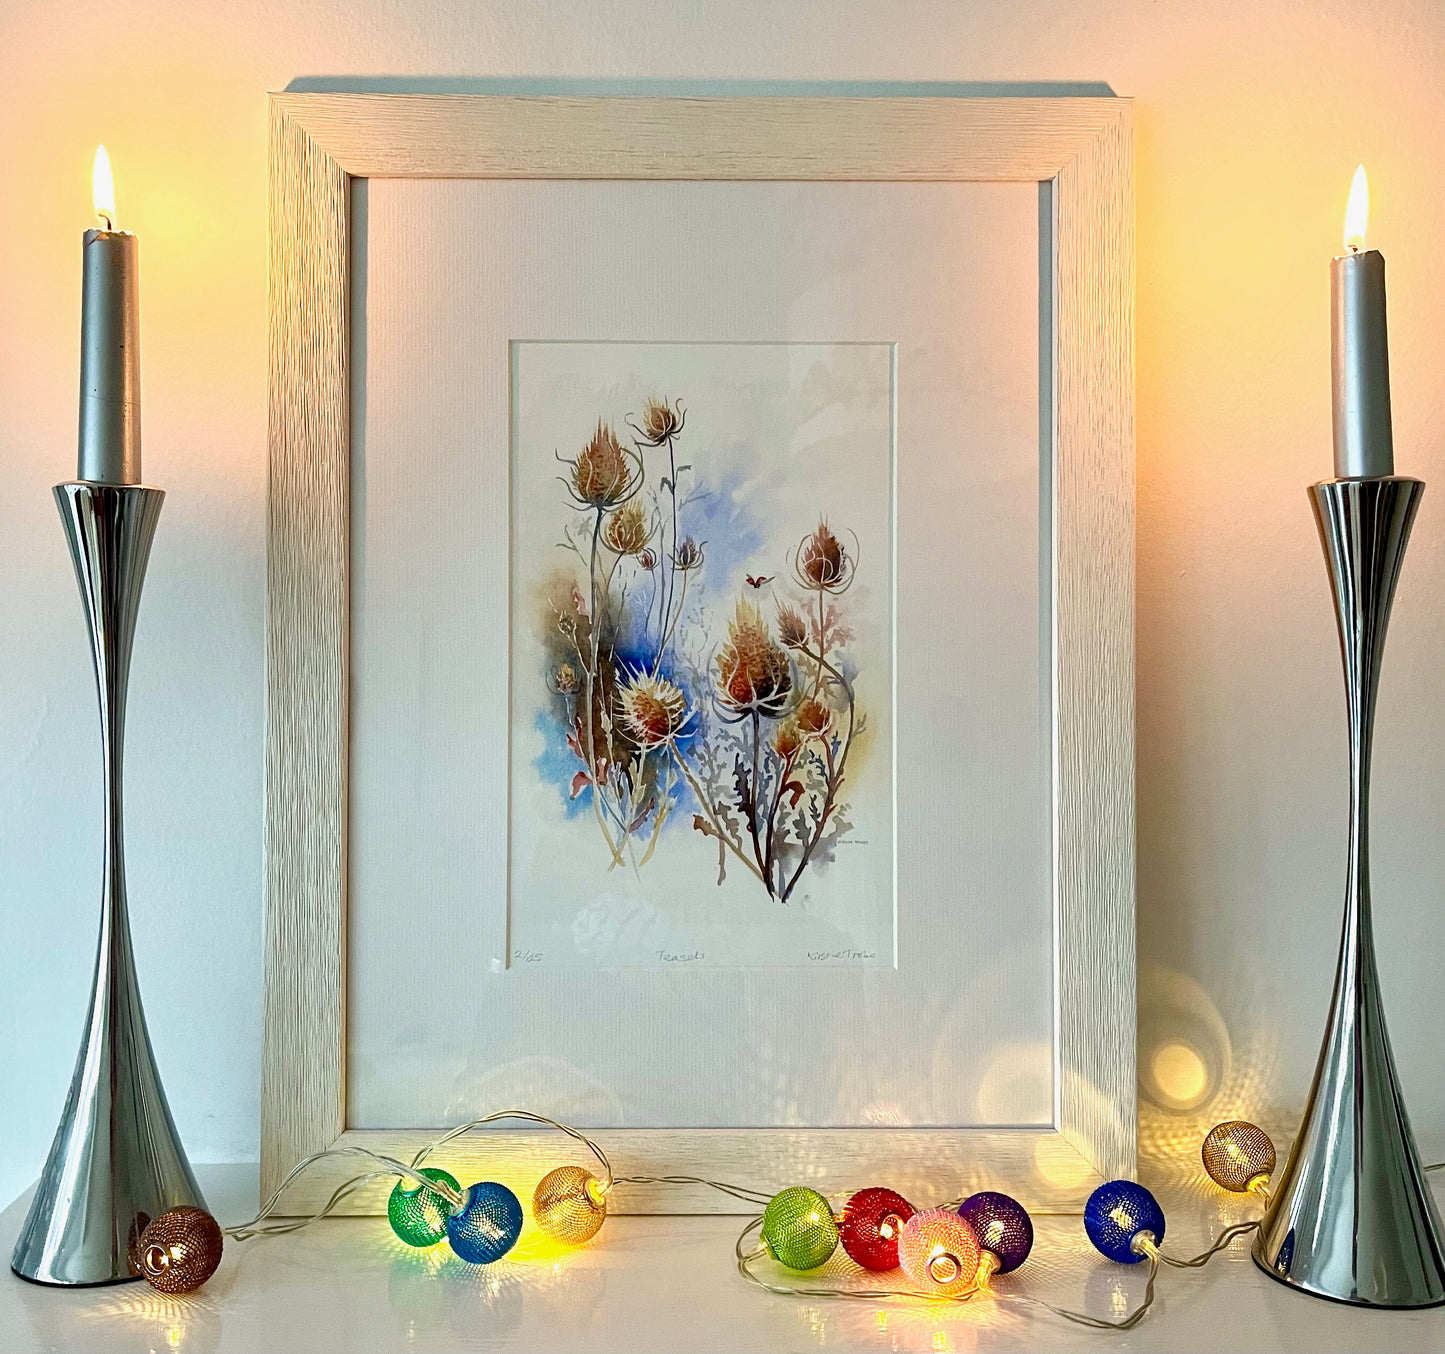 Teasels, Fine Art Giclee Limited Edition Print